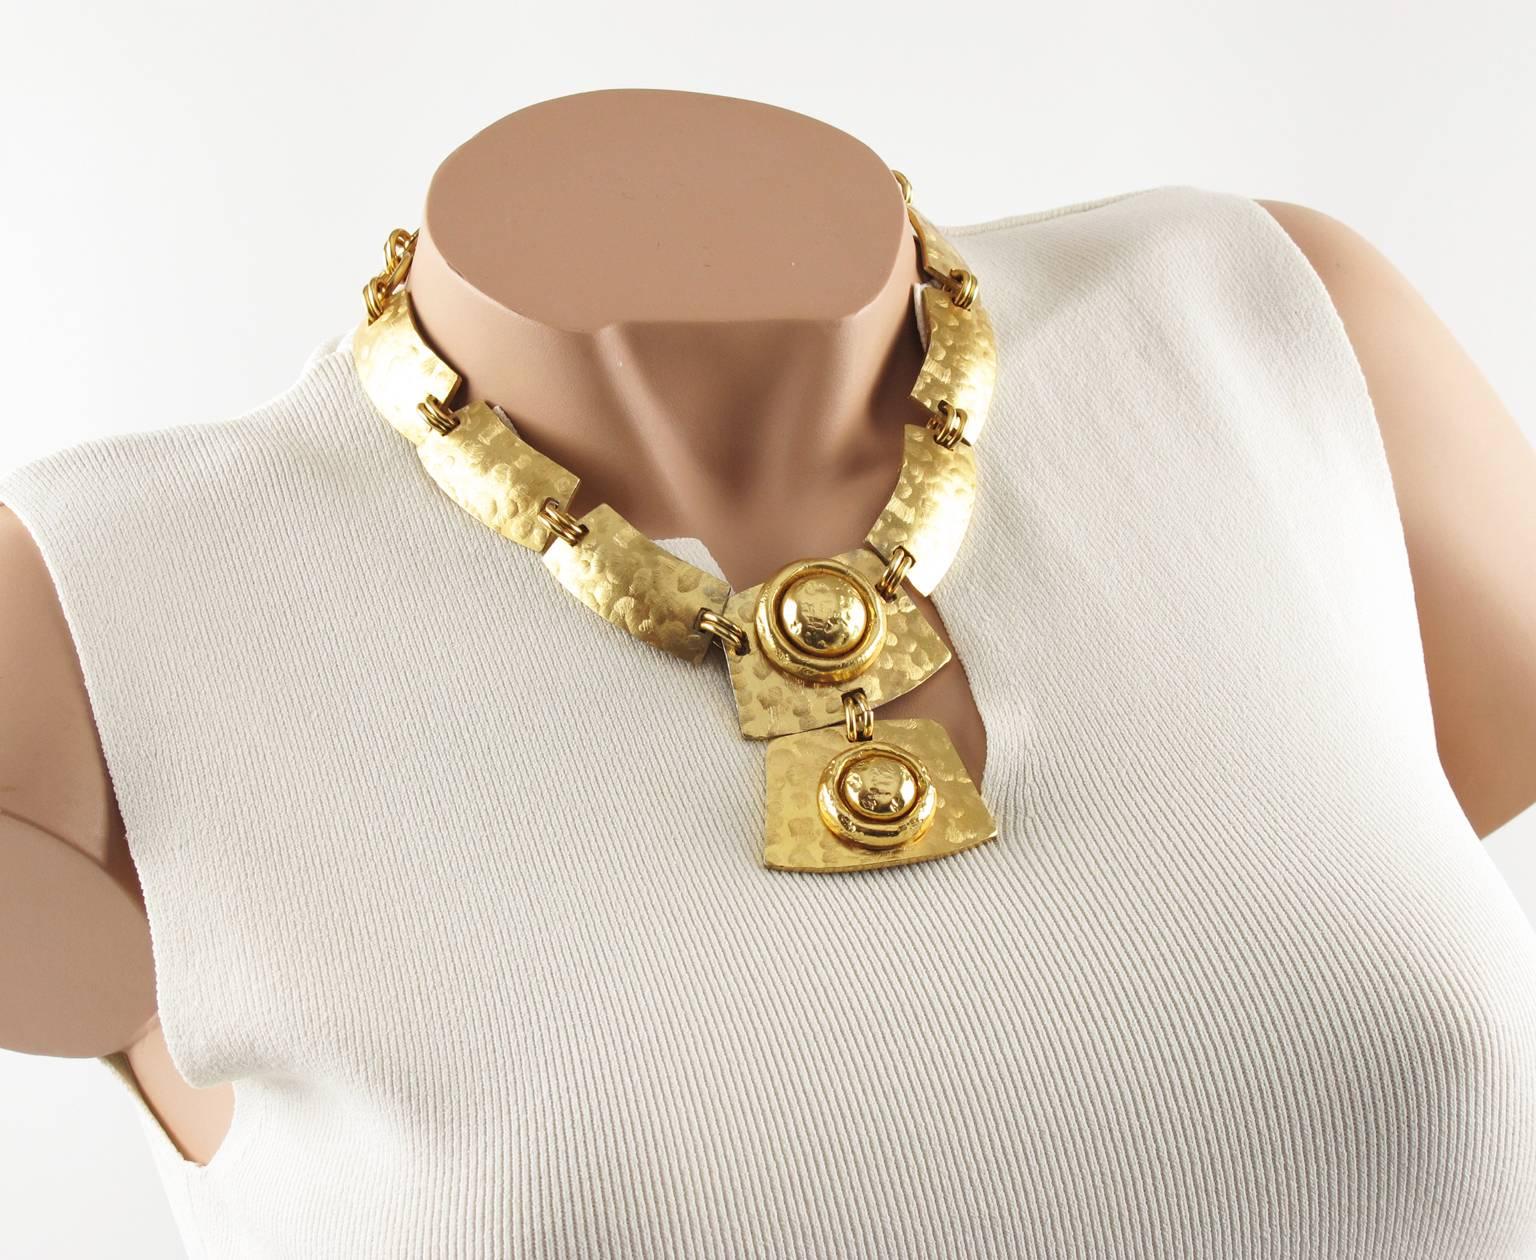 Rare French manufacturer Orena Paris gilded aluminum choker necklace. Elegant around the neck shape with slightly hammered and textured geometric elements with central double decker pendant. Chain with toggle clasp closing for length flexibility.